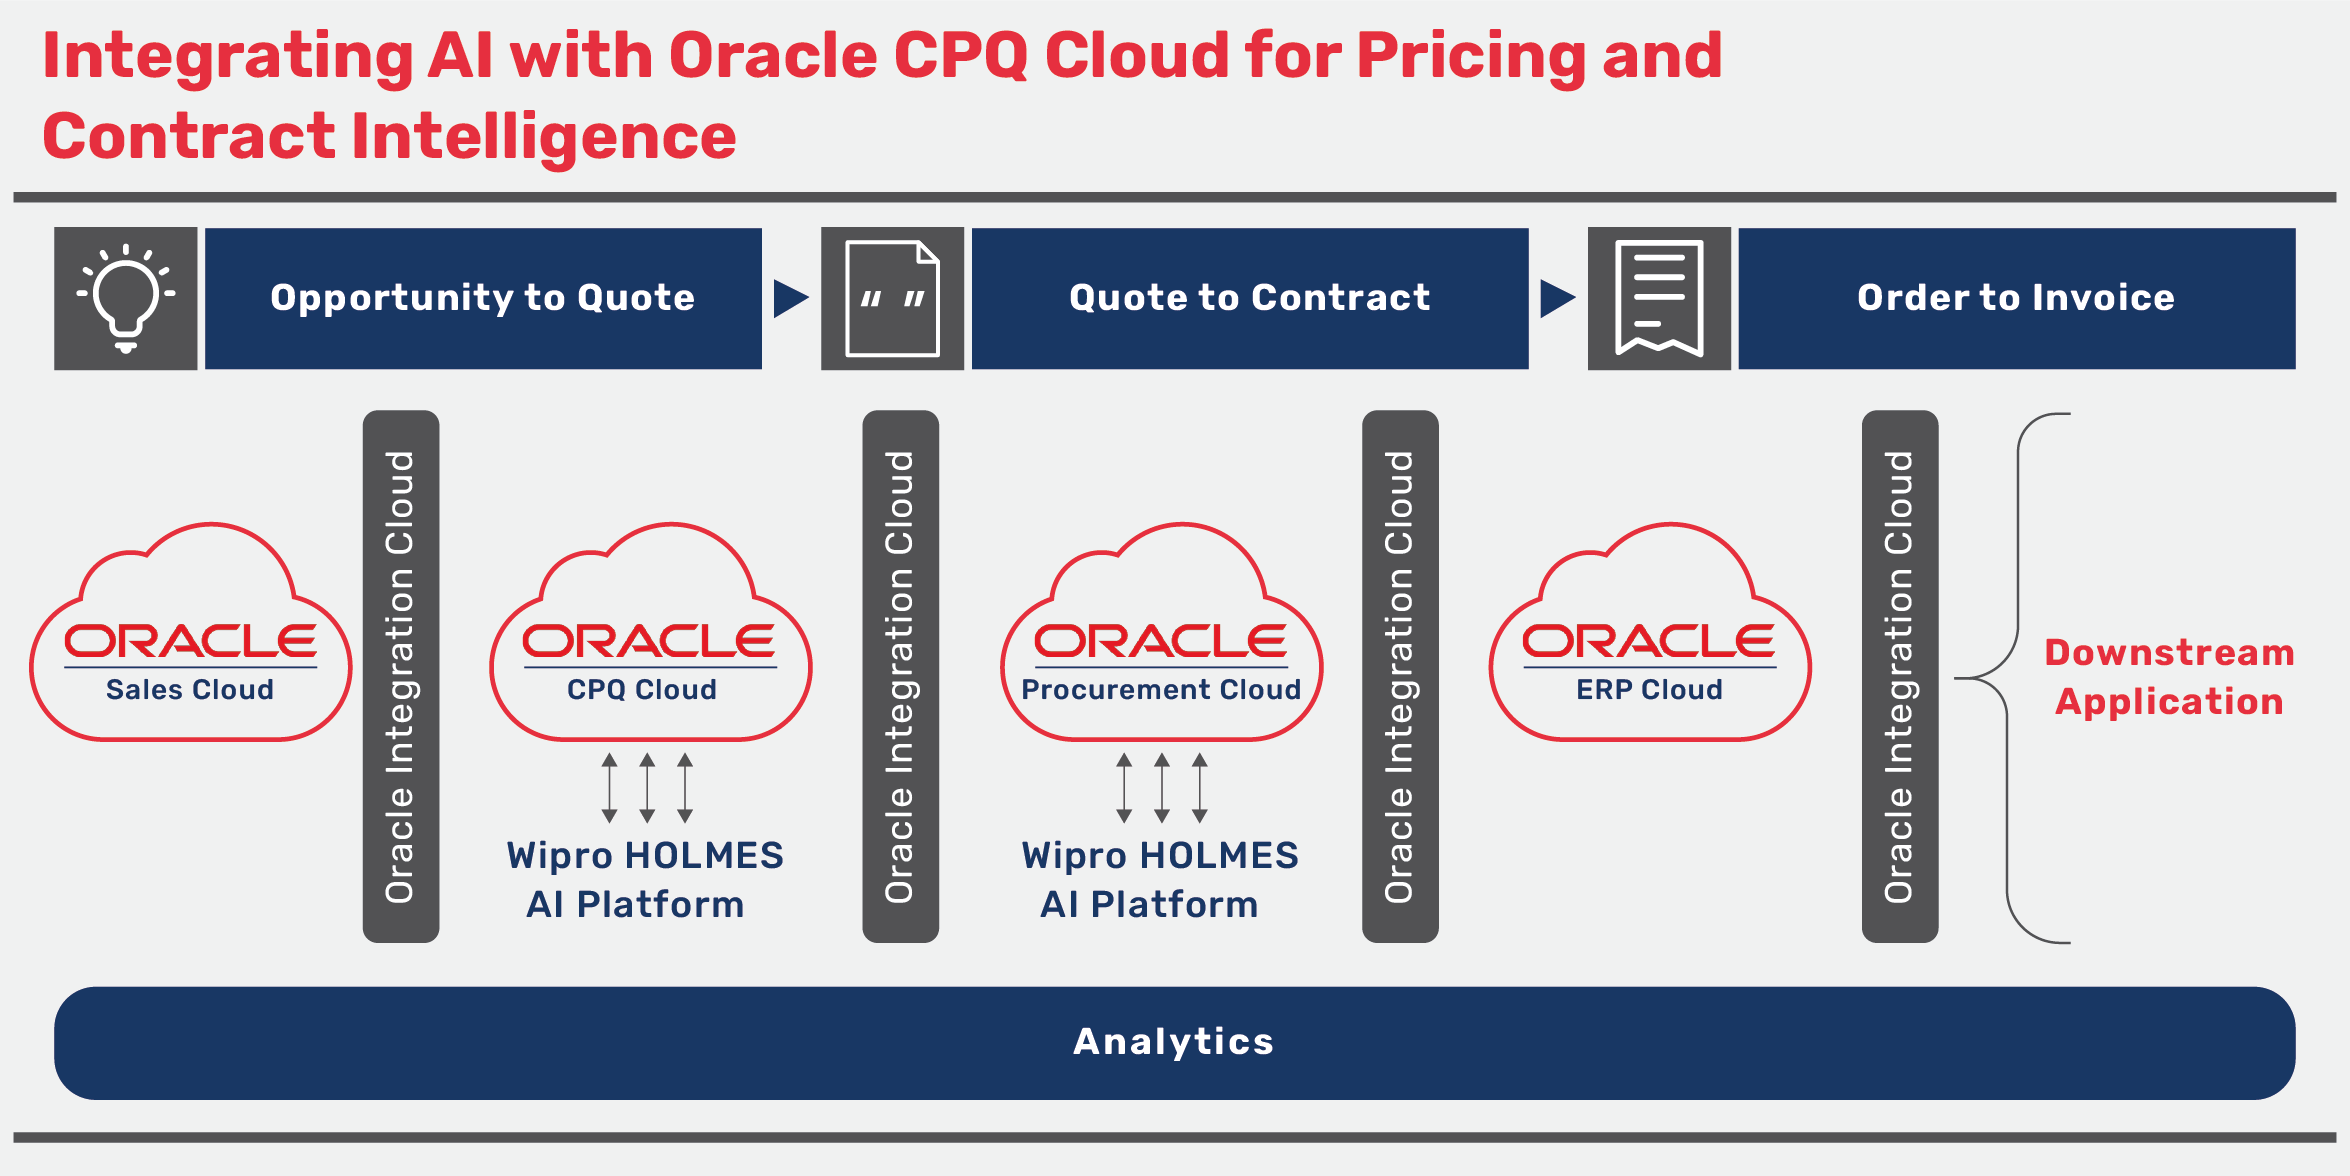 Integrating AI with Oracle CPQ Cloud for Pricing and Contract Intelligence